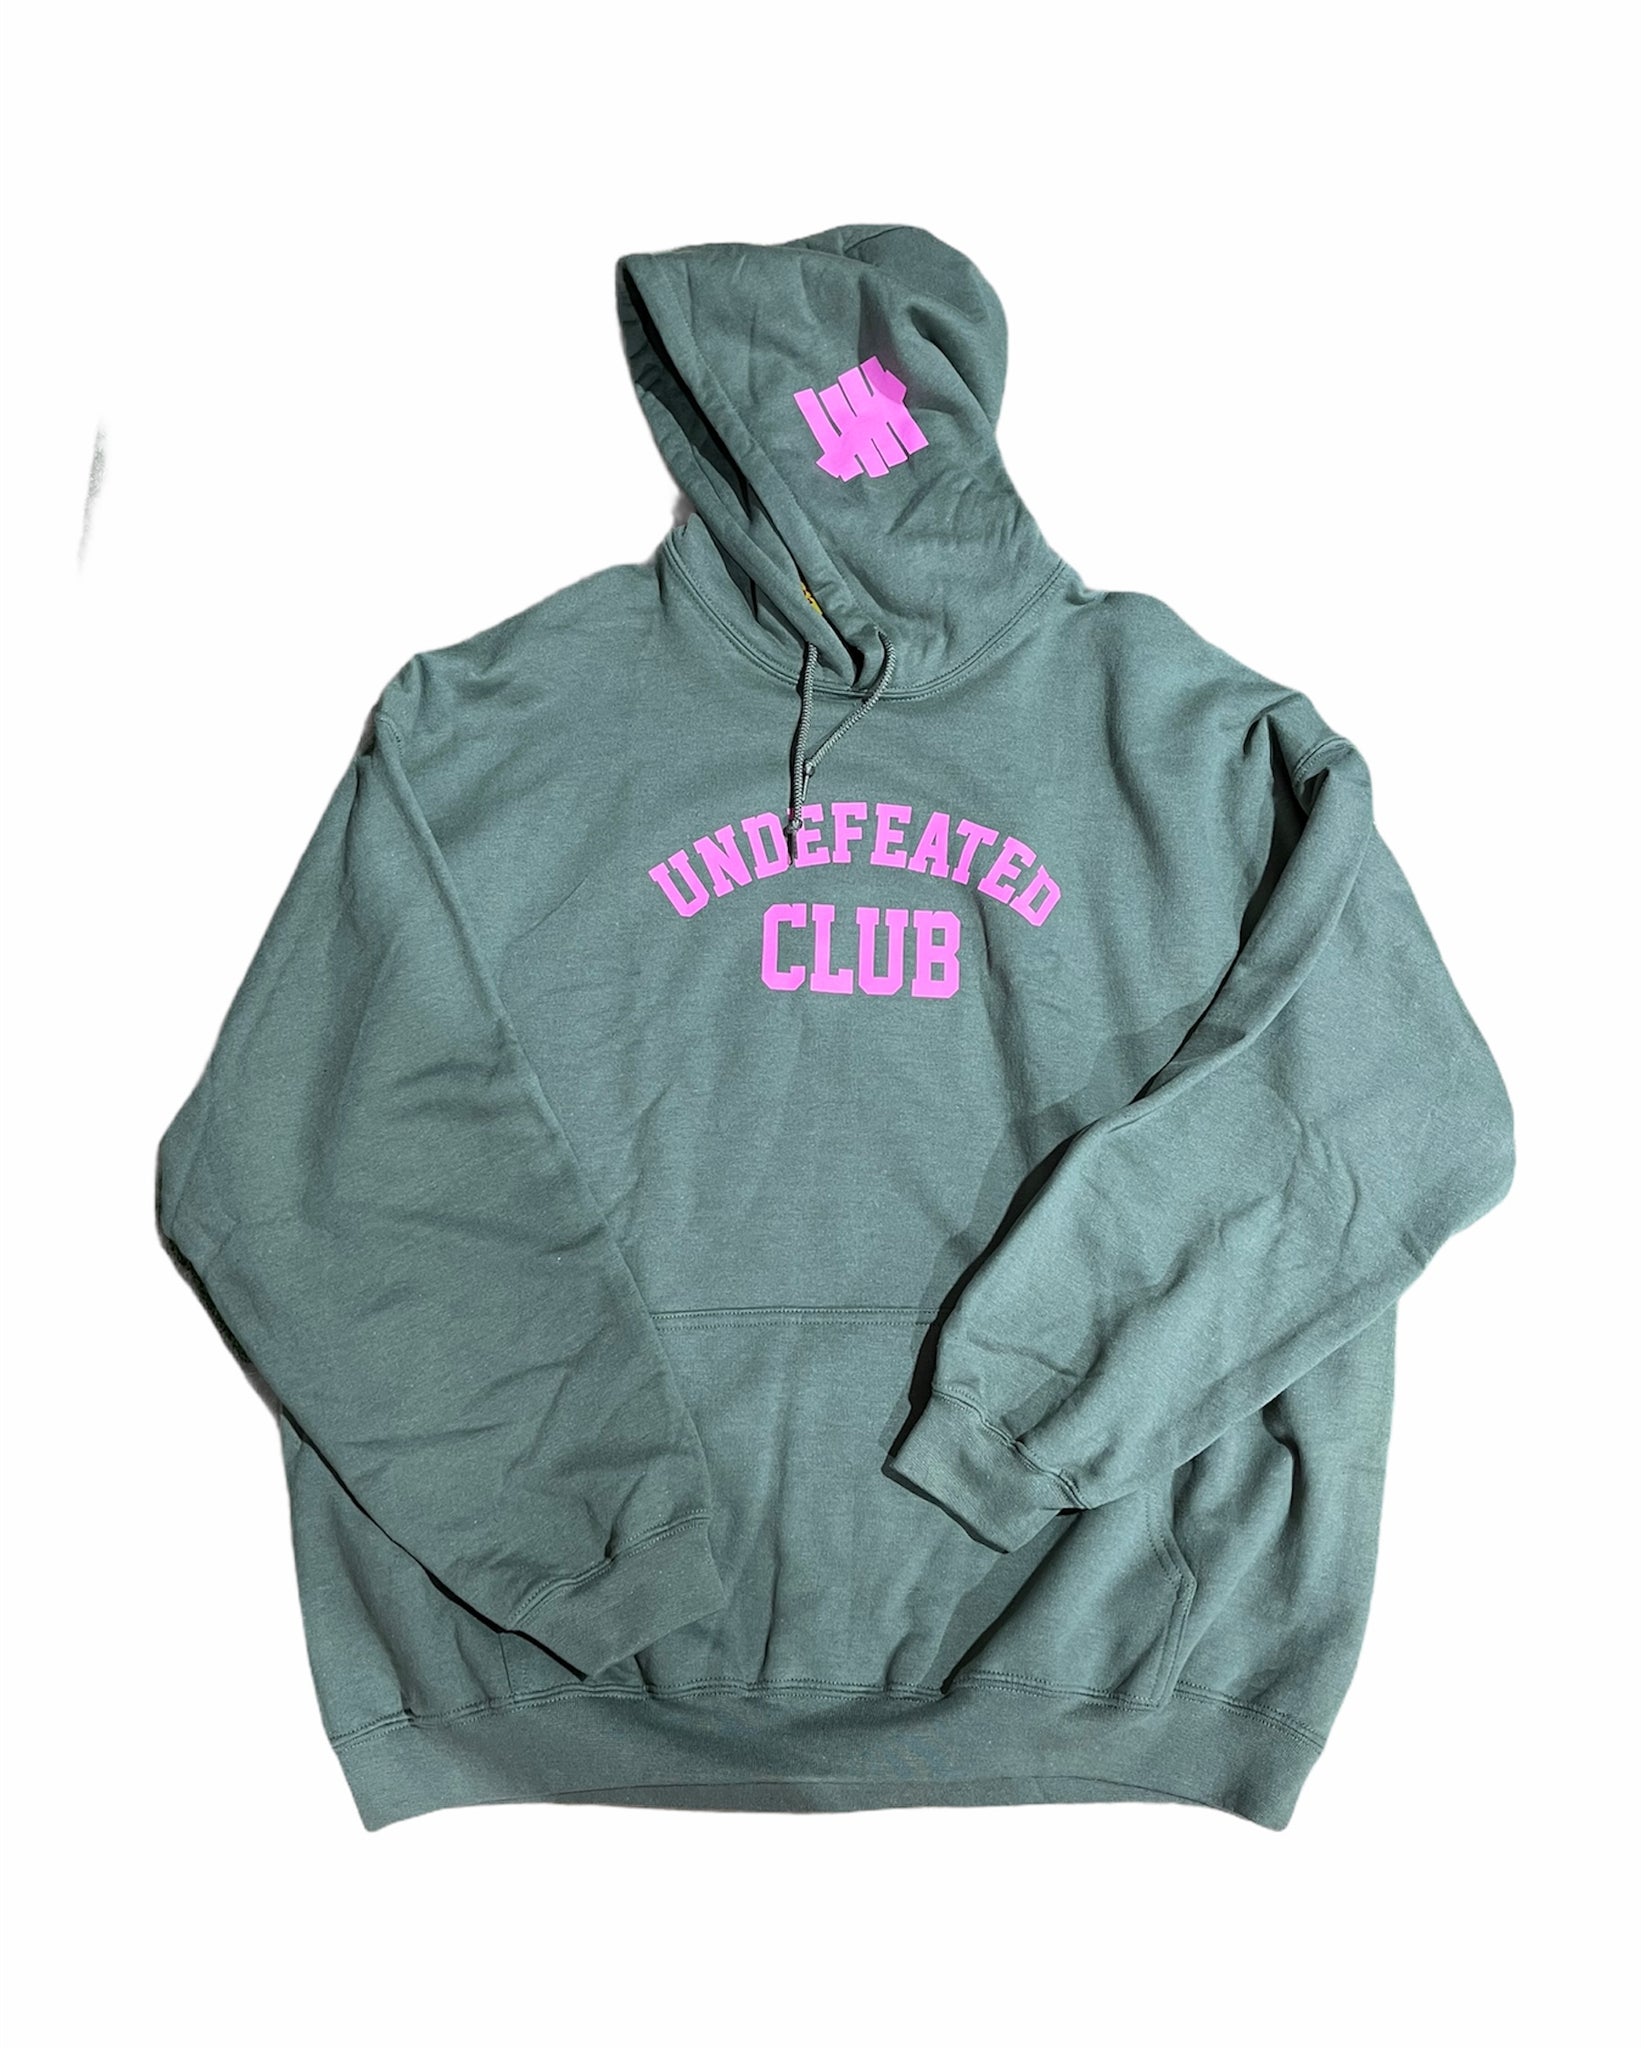 ASSC x Undefeated Hoodie